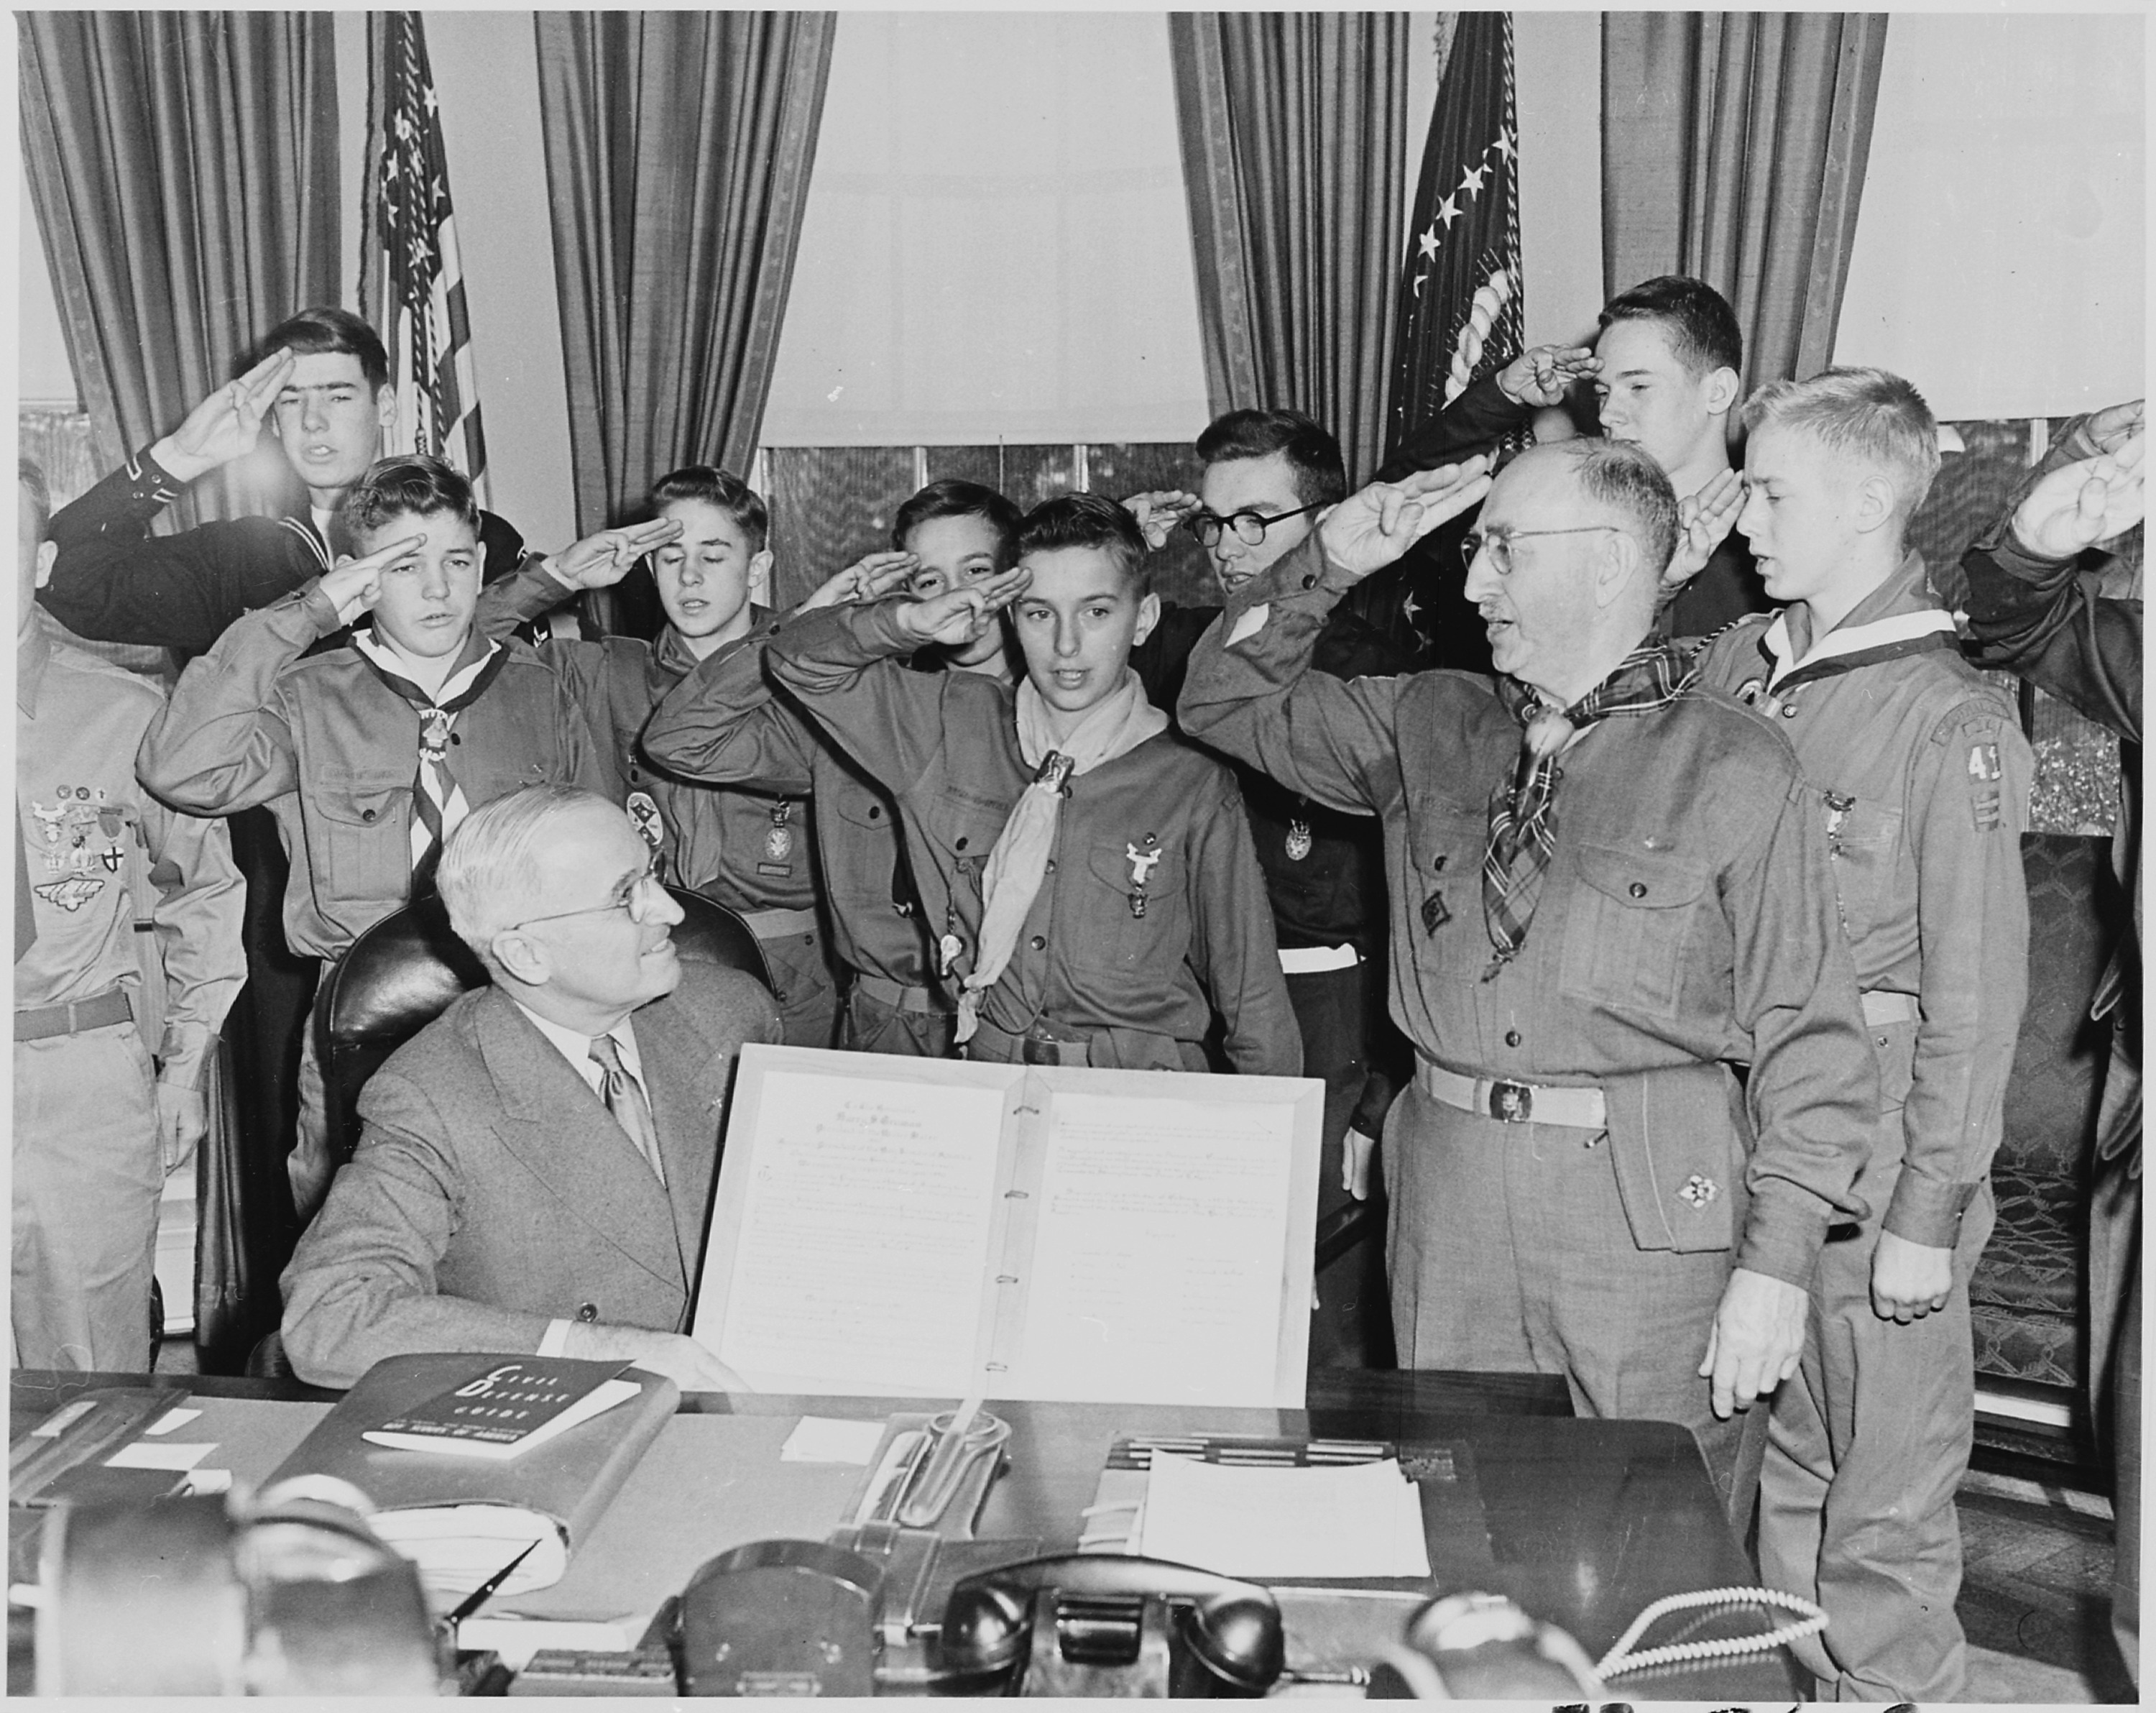 Photograph of President Truman in the Oval Office receiving a report on the accomplishments of the Boy Scouts from a... - NARA - 200293